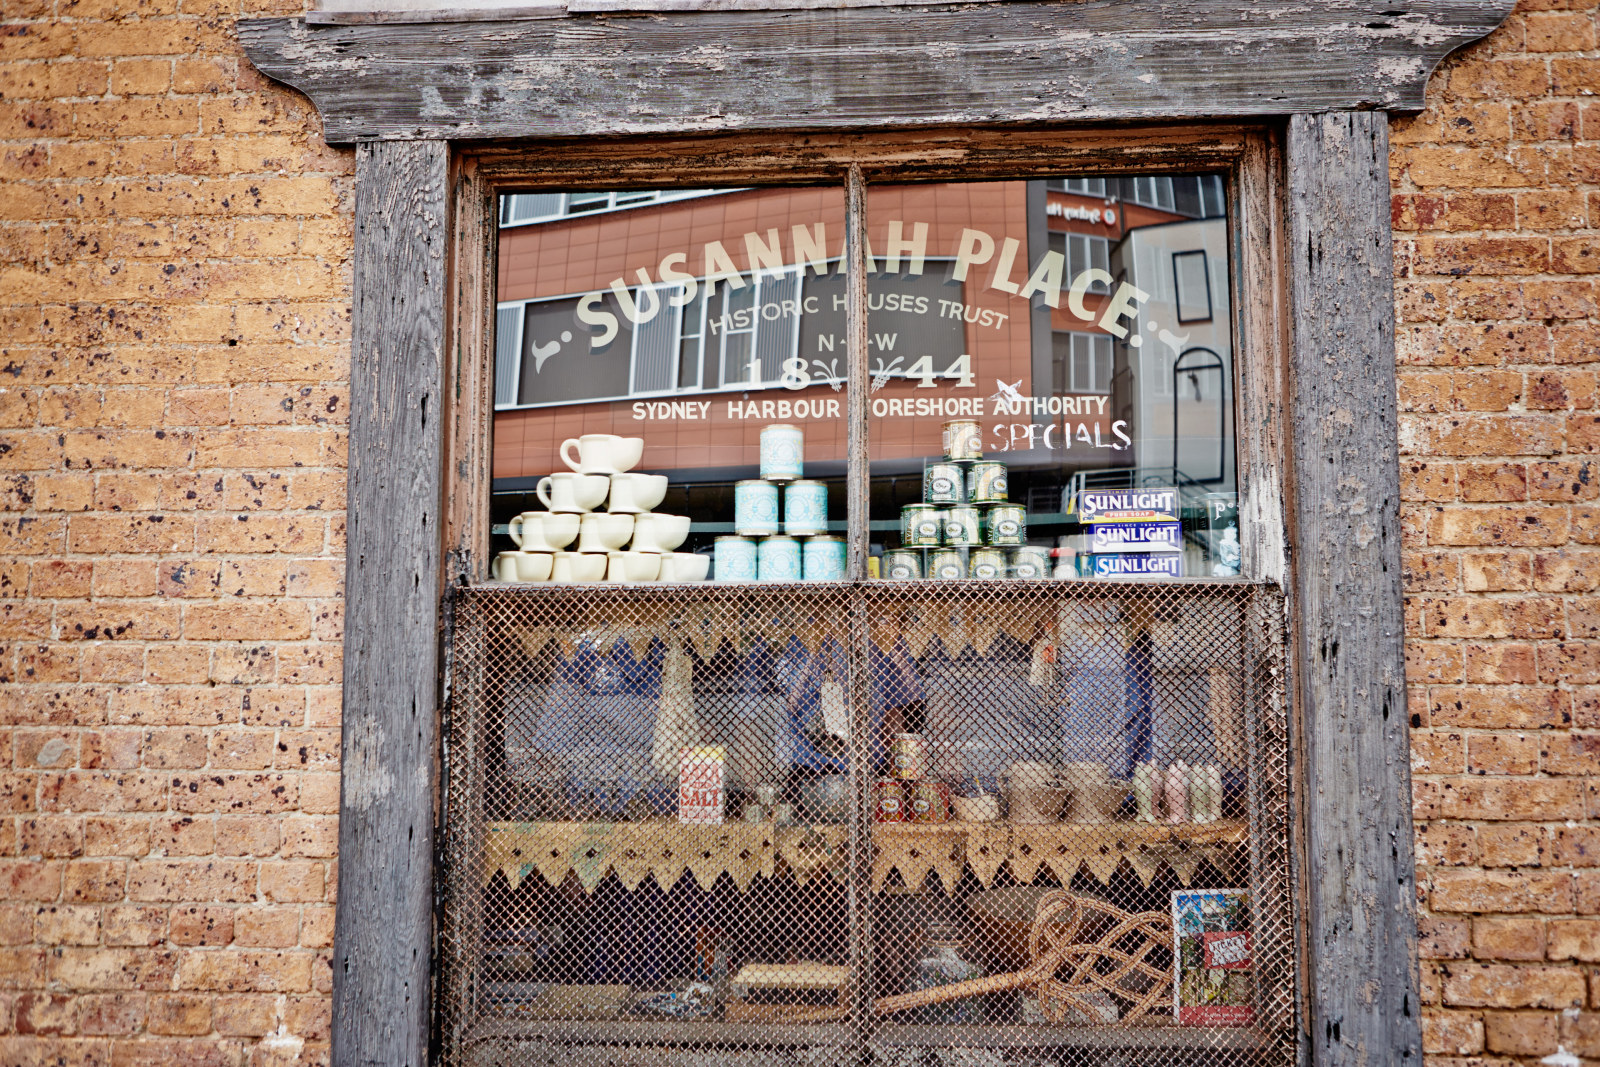 Goods in the window of the corner shop, 64 Gloucester Street, Susannah Place Museum